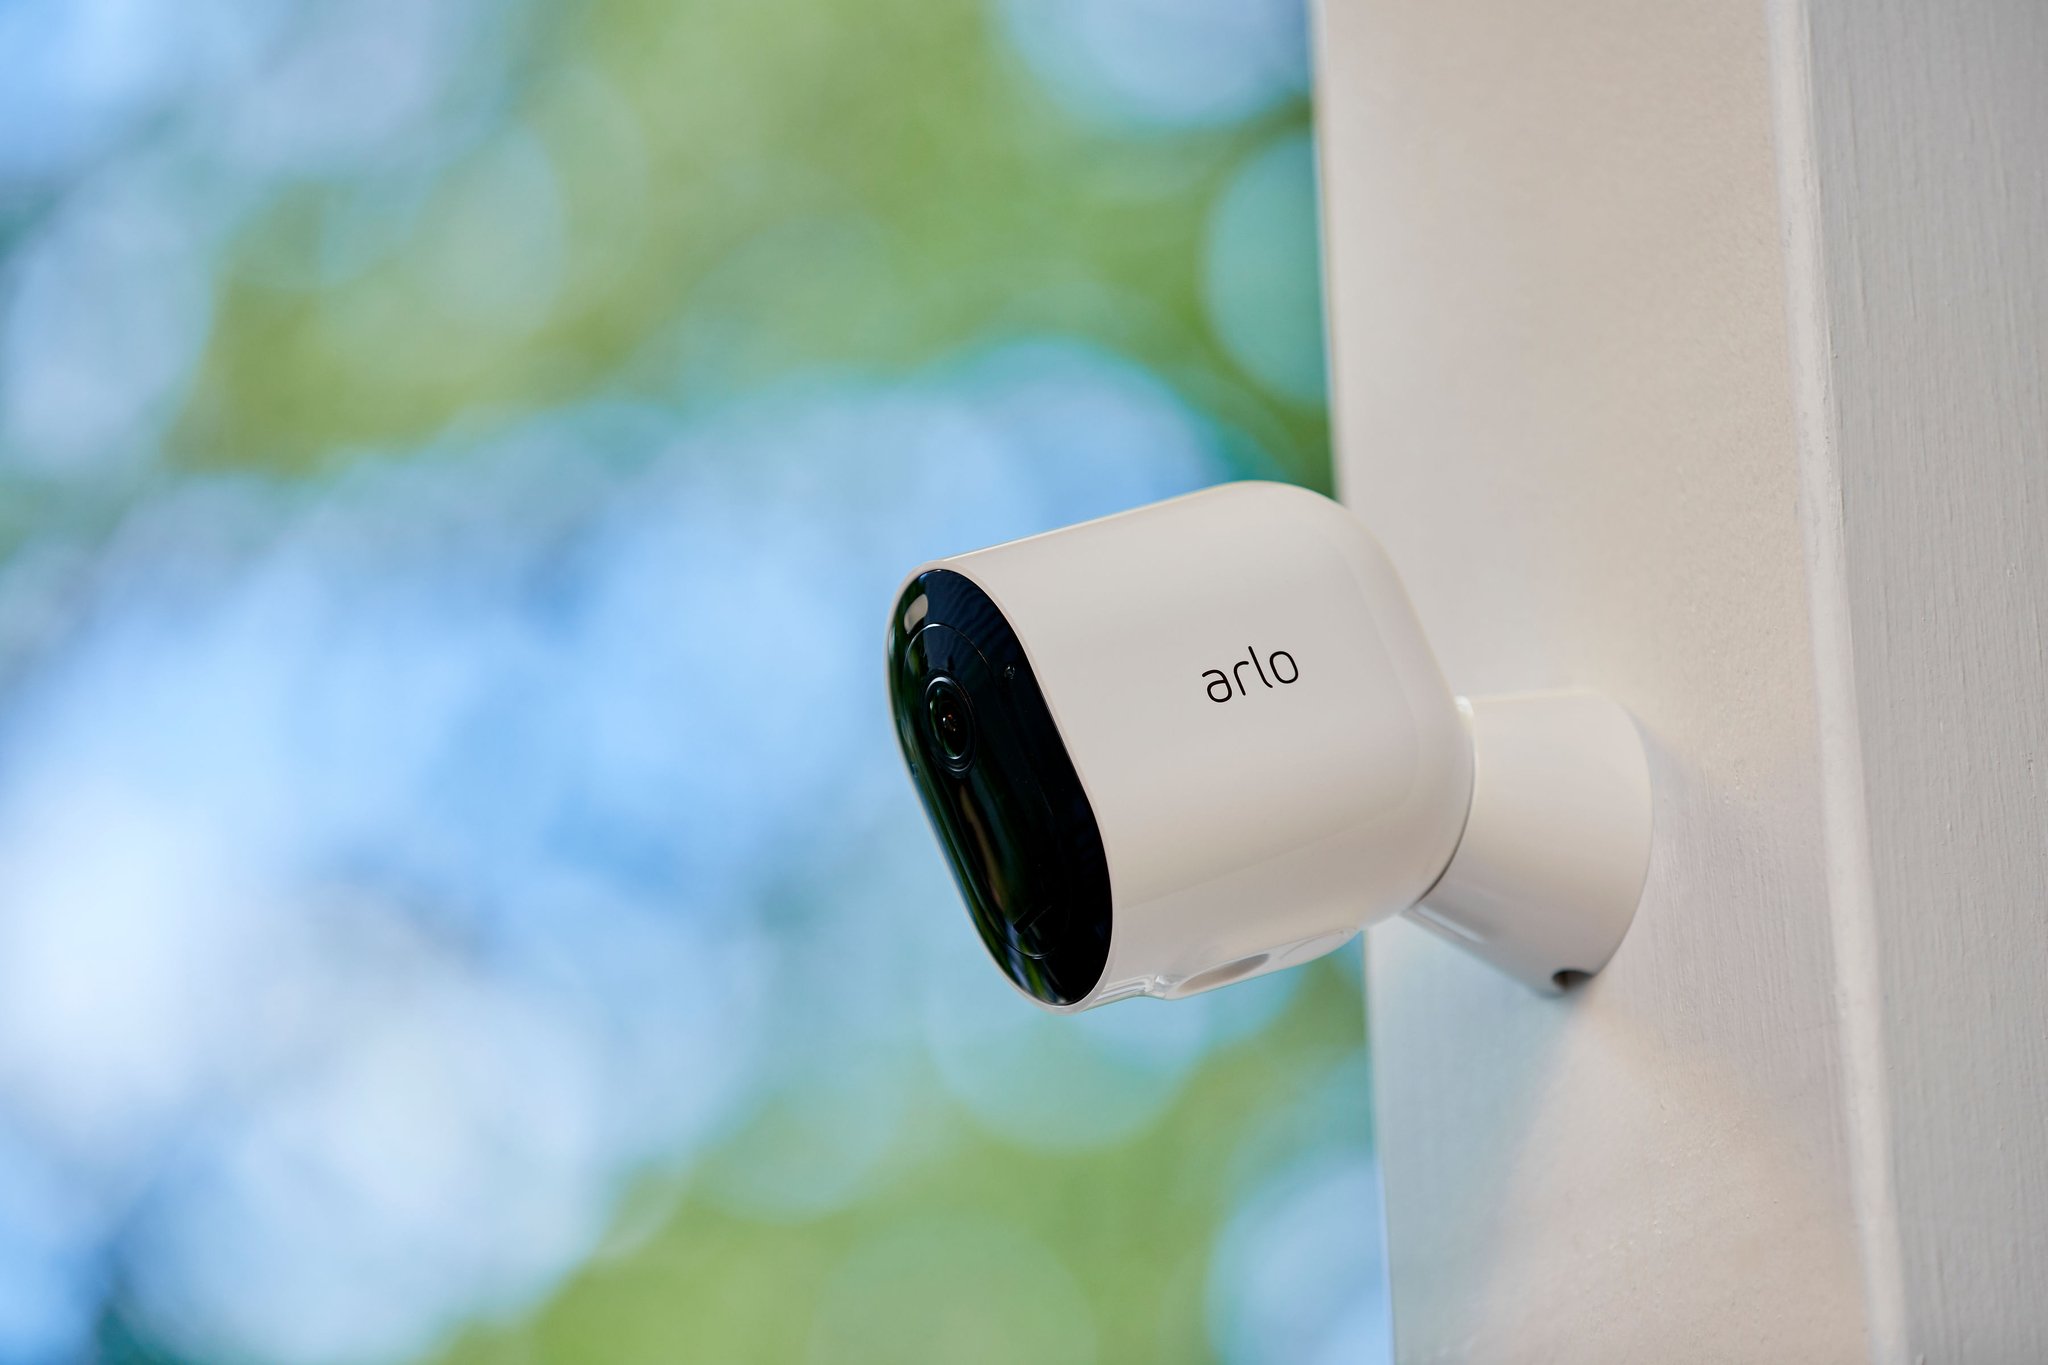 Arlo Pro 4 installed in an outdoor setting